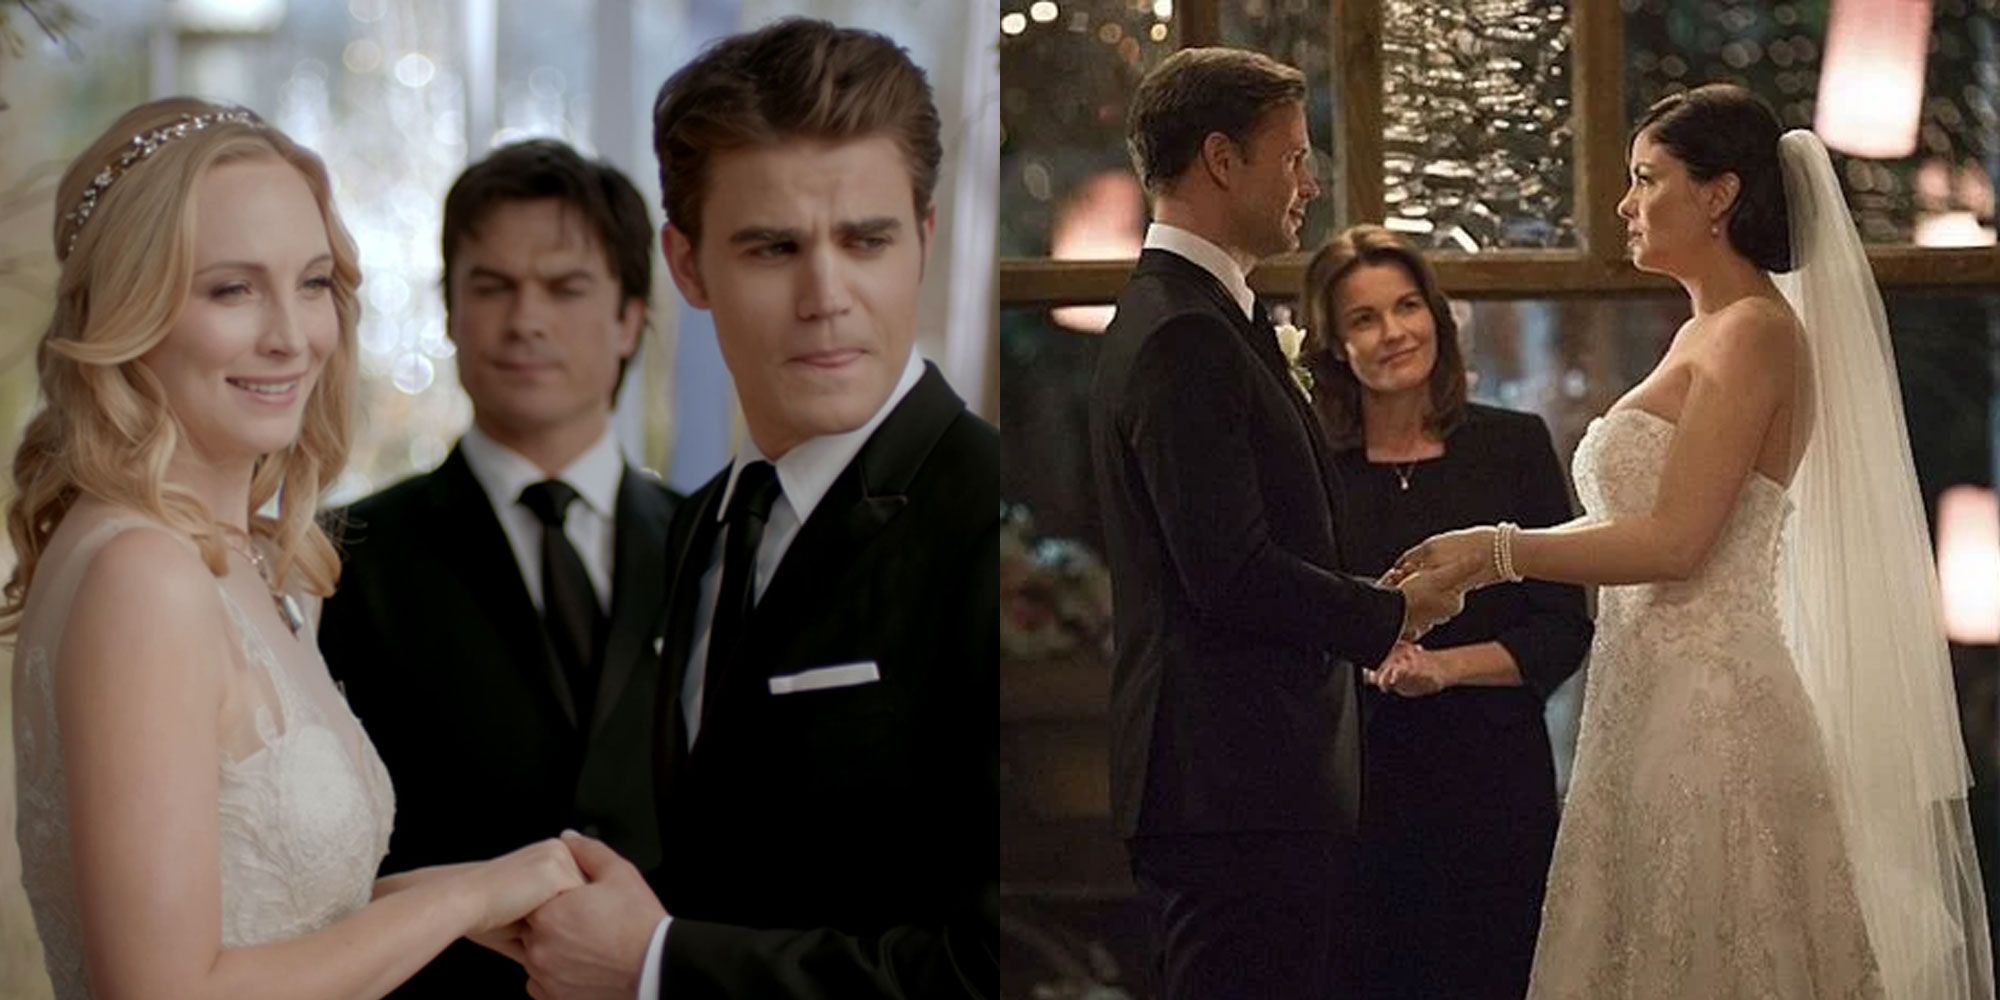 A split image features Caroline and Stefan marrying alongside Alaric and Jo marrying in The Vampire Diaries